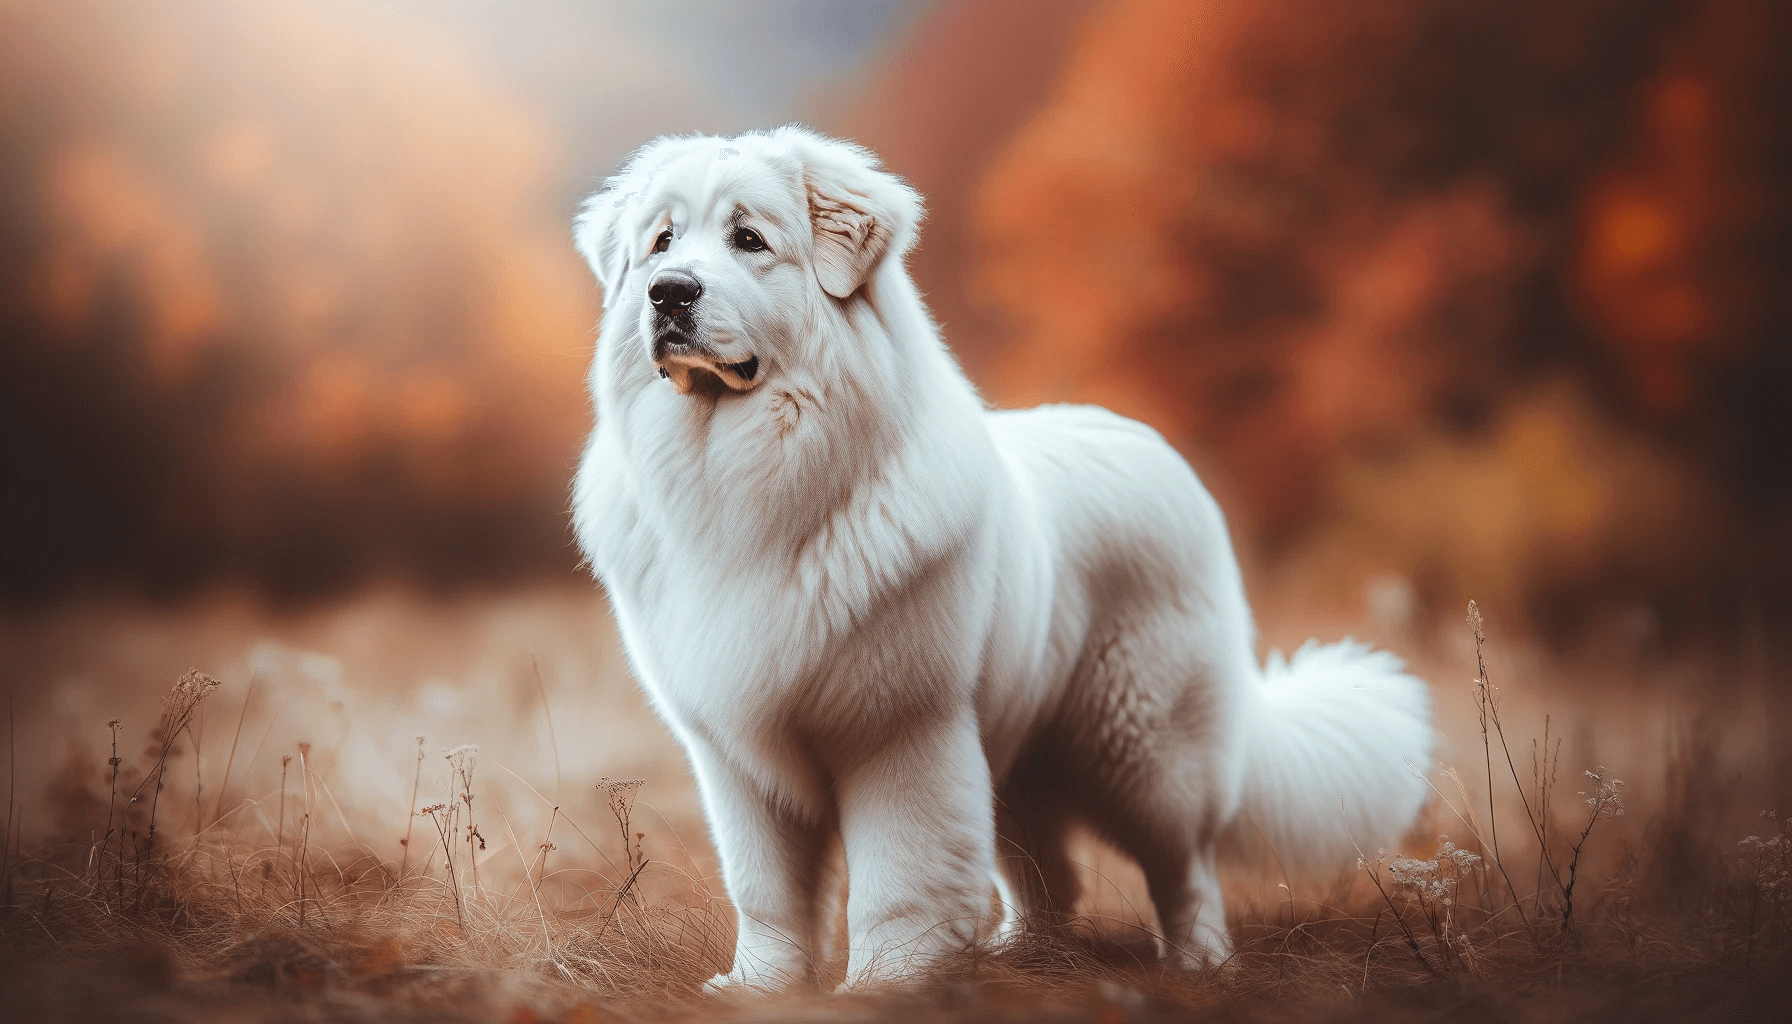 Pyrenees Lab Mix dog with a thick, fluffy white coat standing in an outdoor setting, showcasing its full body. The dog is looking off to the side